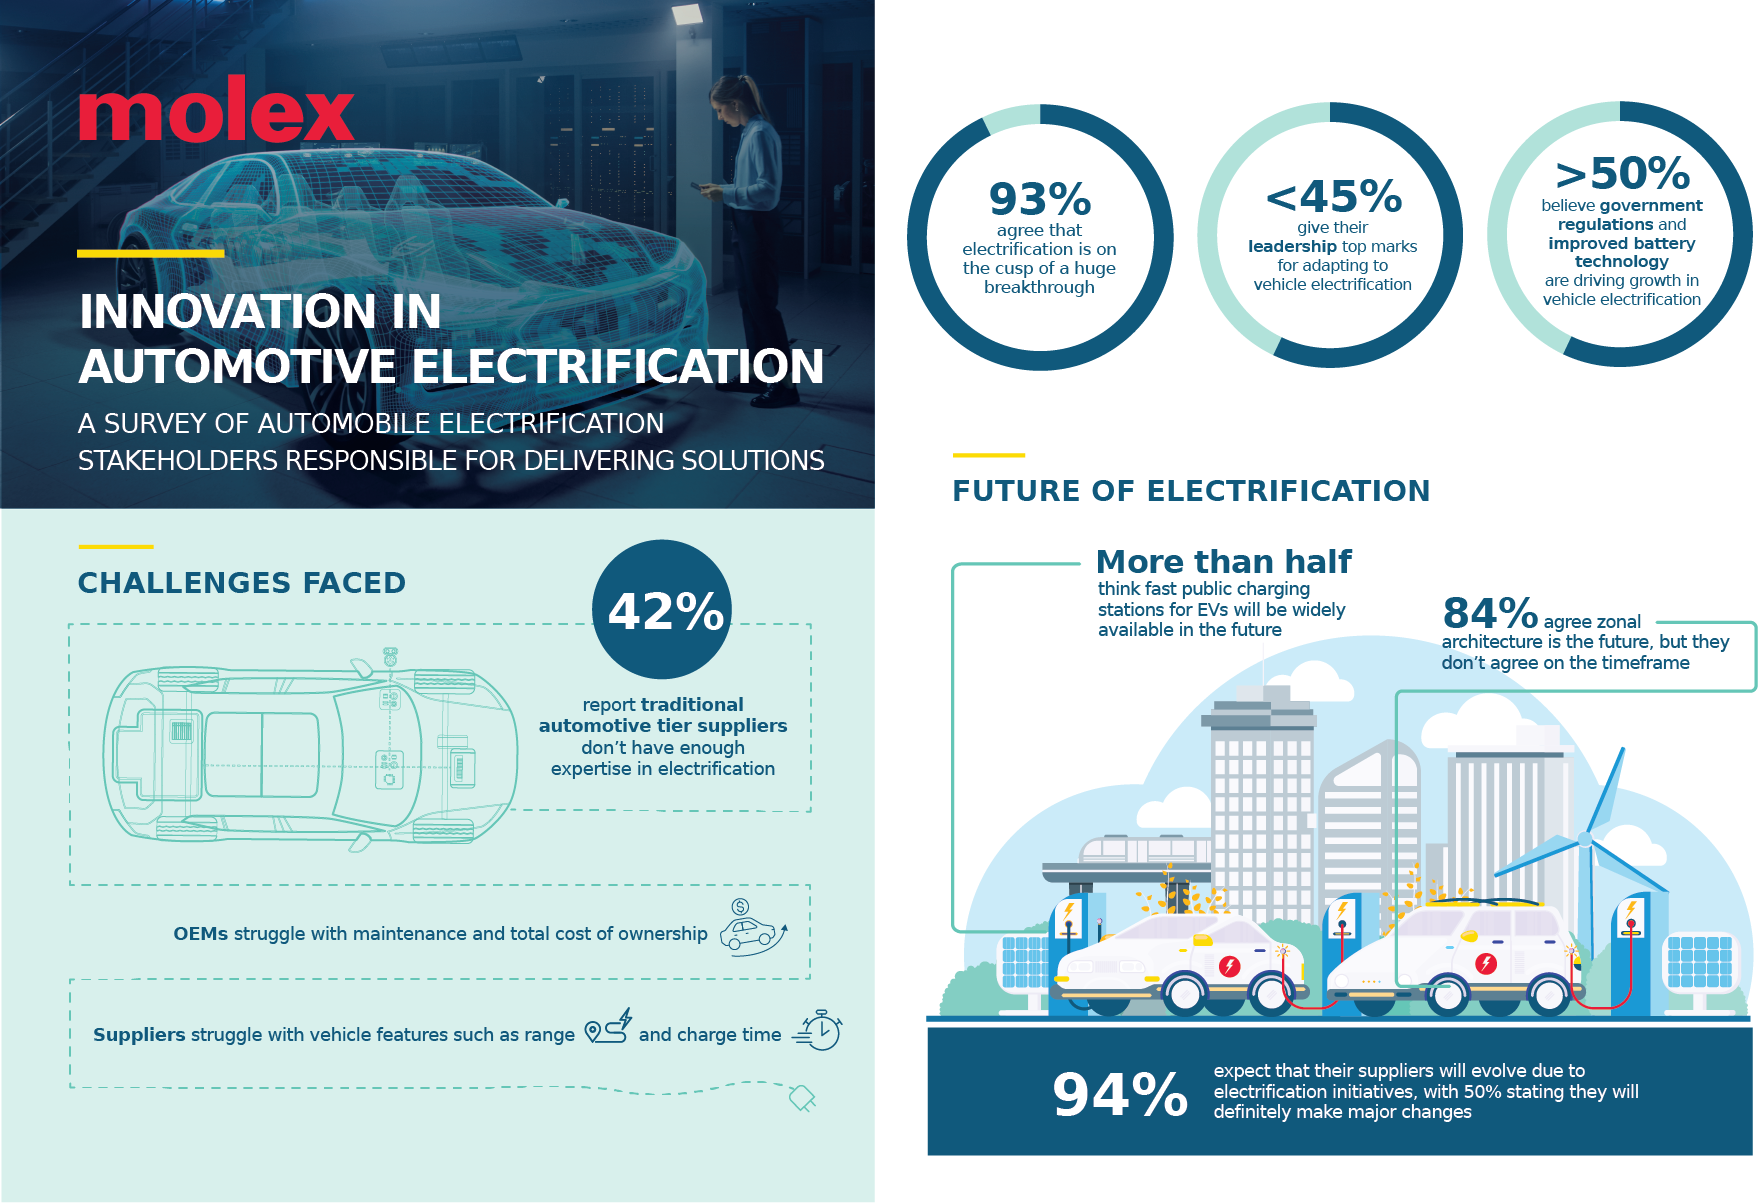 Molex Reveals Trends in Innovation in Automotive Electrification